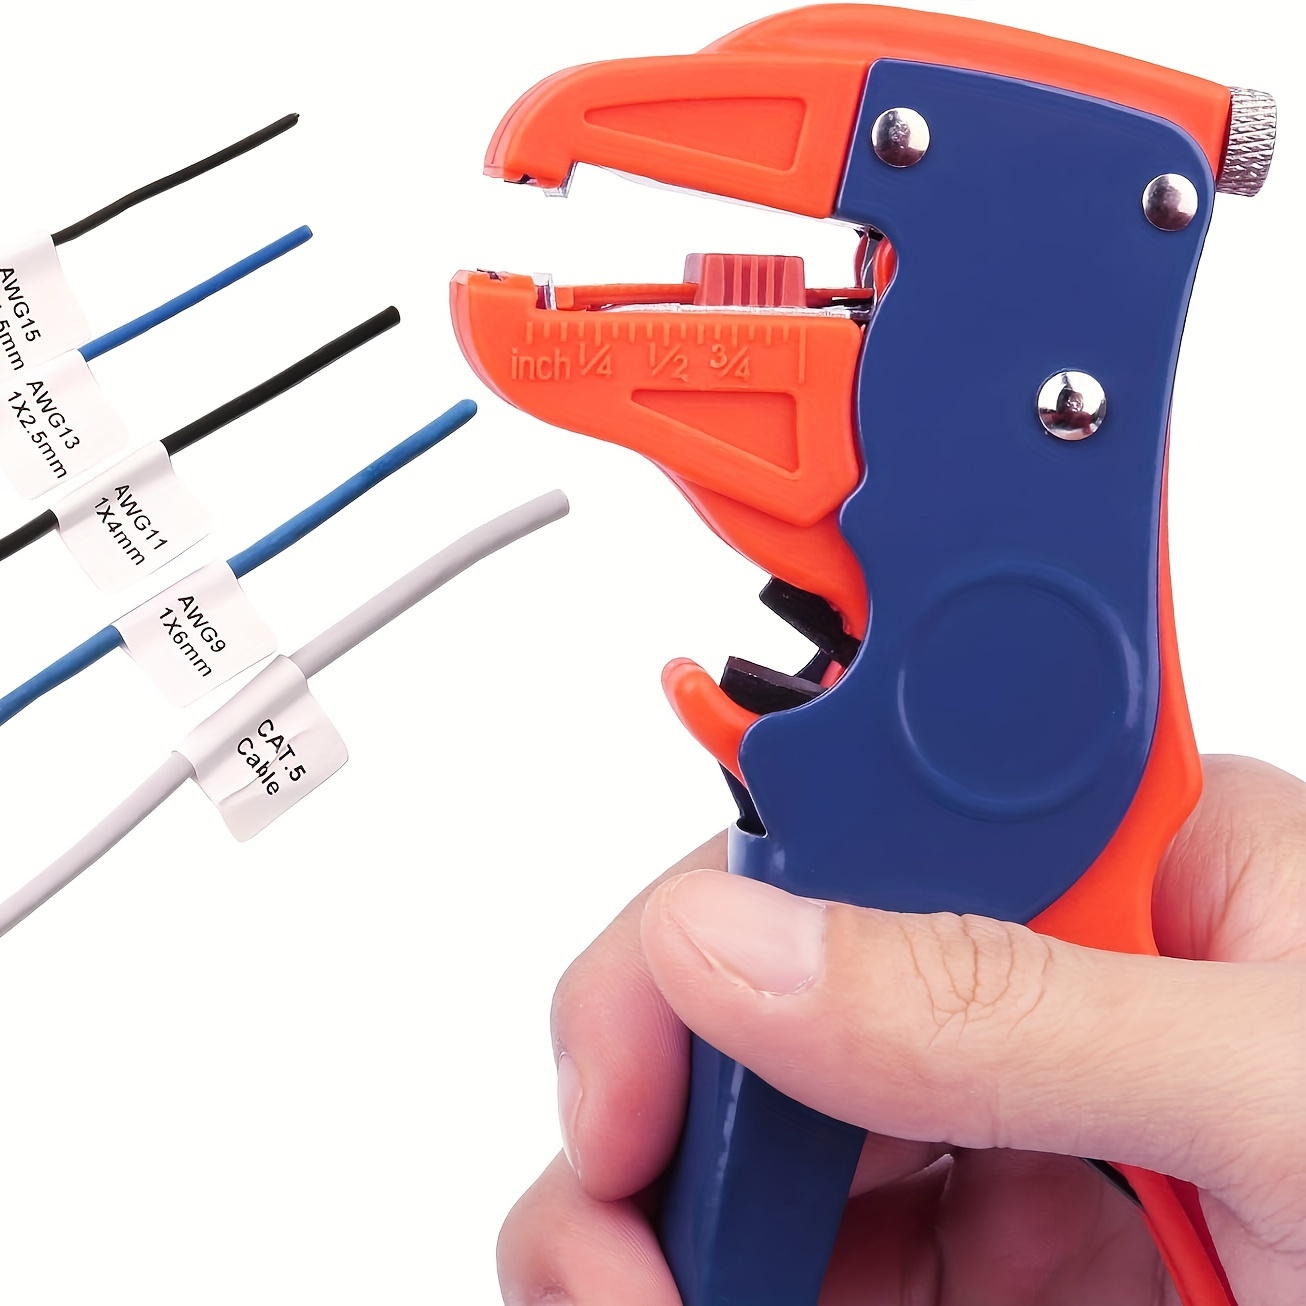 

Automatic Wire Stripper And Cutter, 2 In 1 Wire Stripper Tool, Adjustable 10-24 Awg Electrical Cable Wire Stripping Tool Eagle Nose Plier For Electronic And Automotive Repair